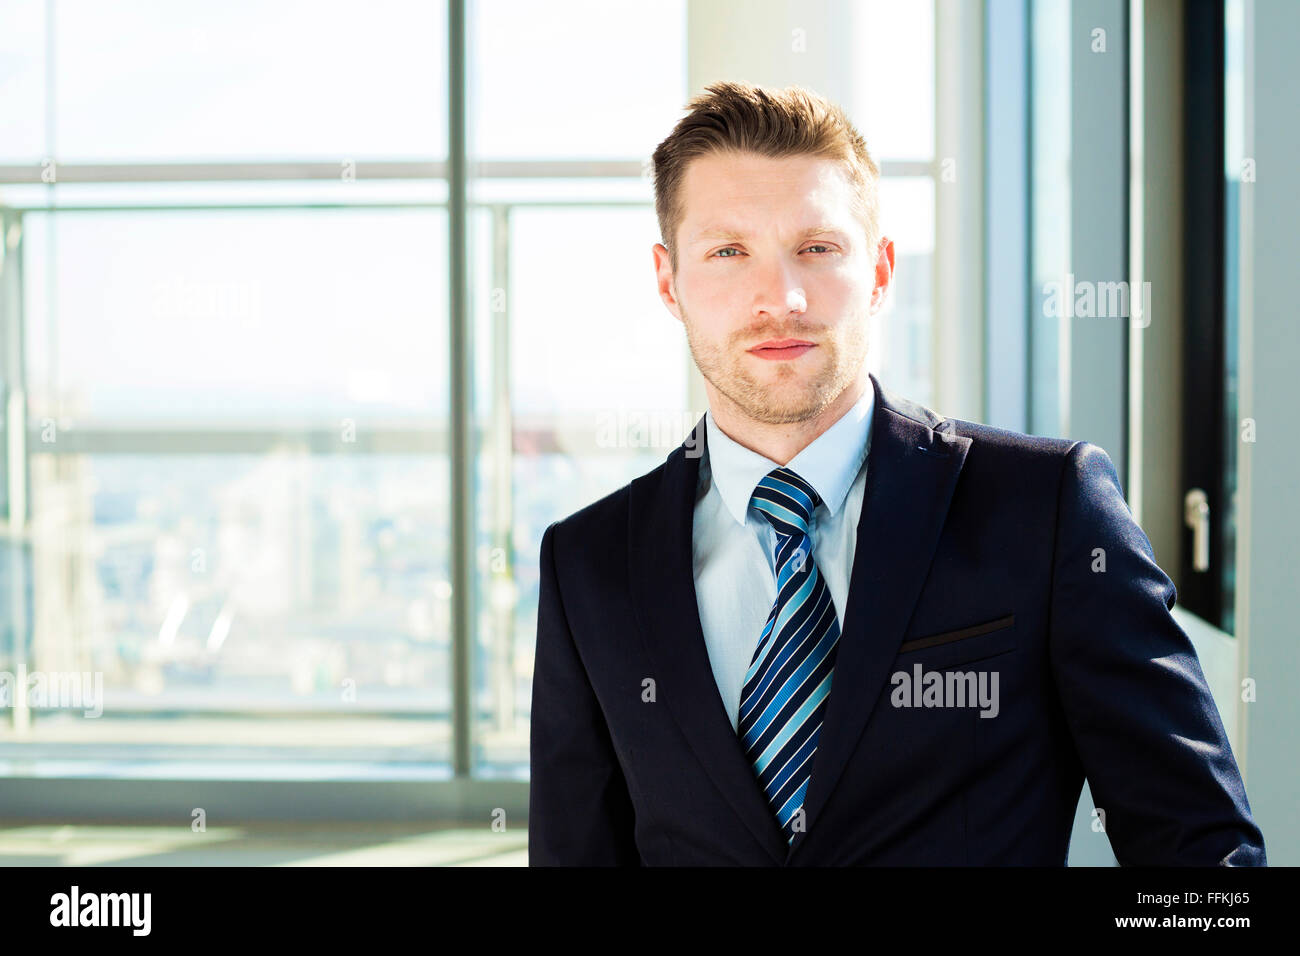 Portrait of well-dressed businessman Stock Photo